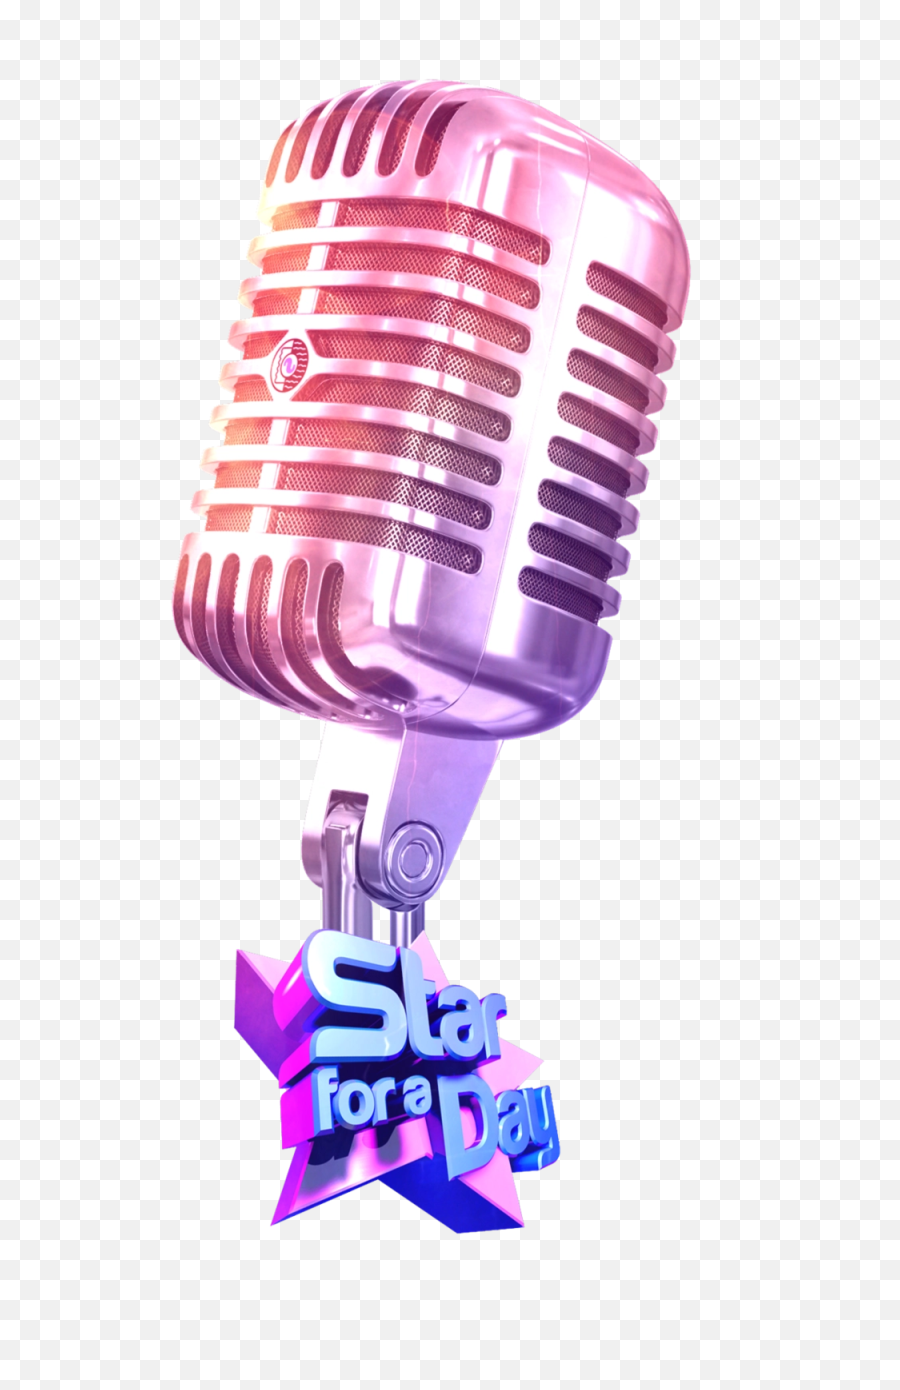 Microphone Png Pink - Microfonos Png Transparent Cartoon Microfono De Radio Png,Microphone Stand Png